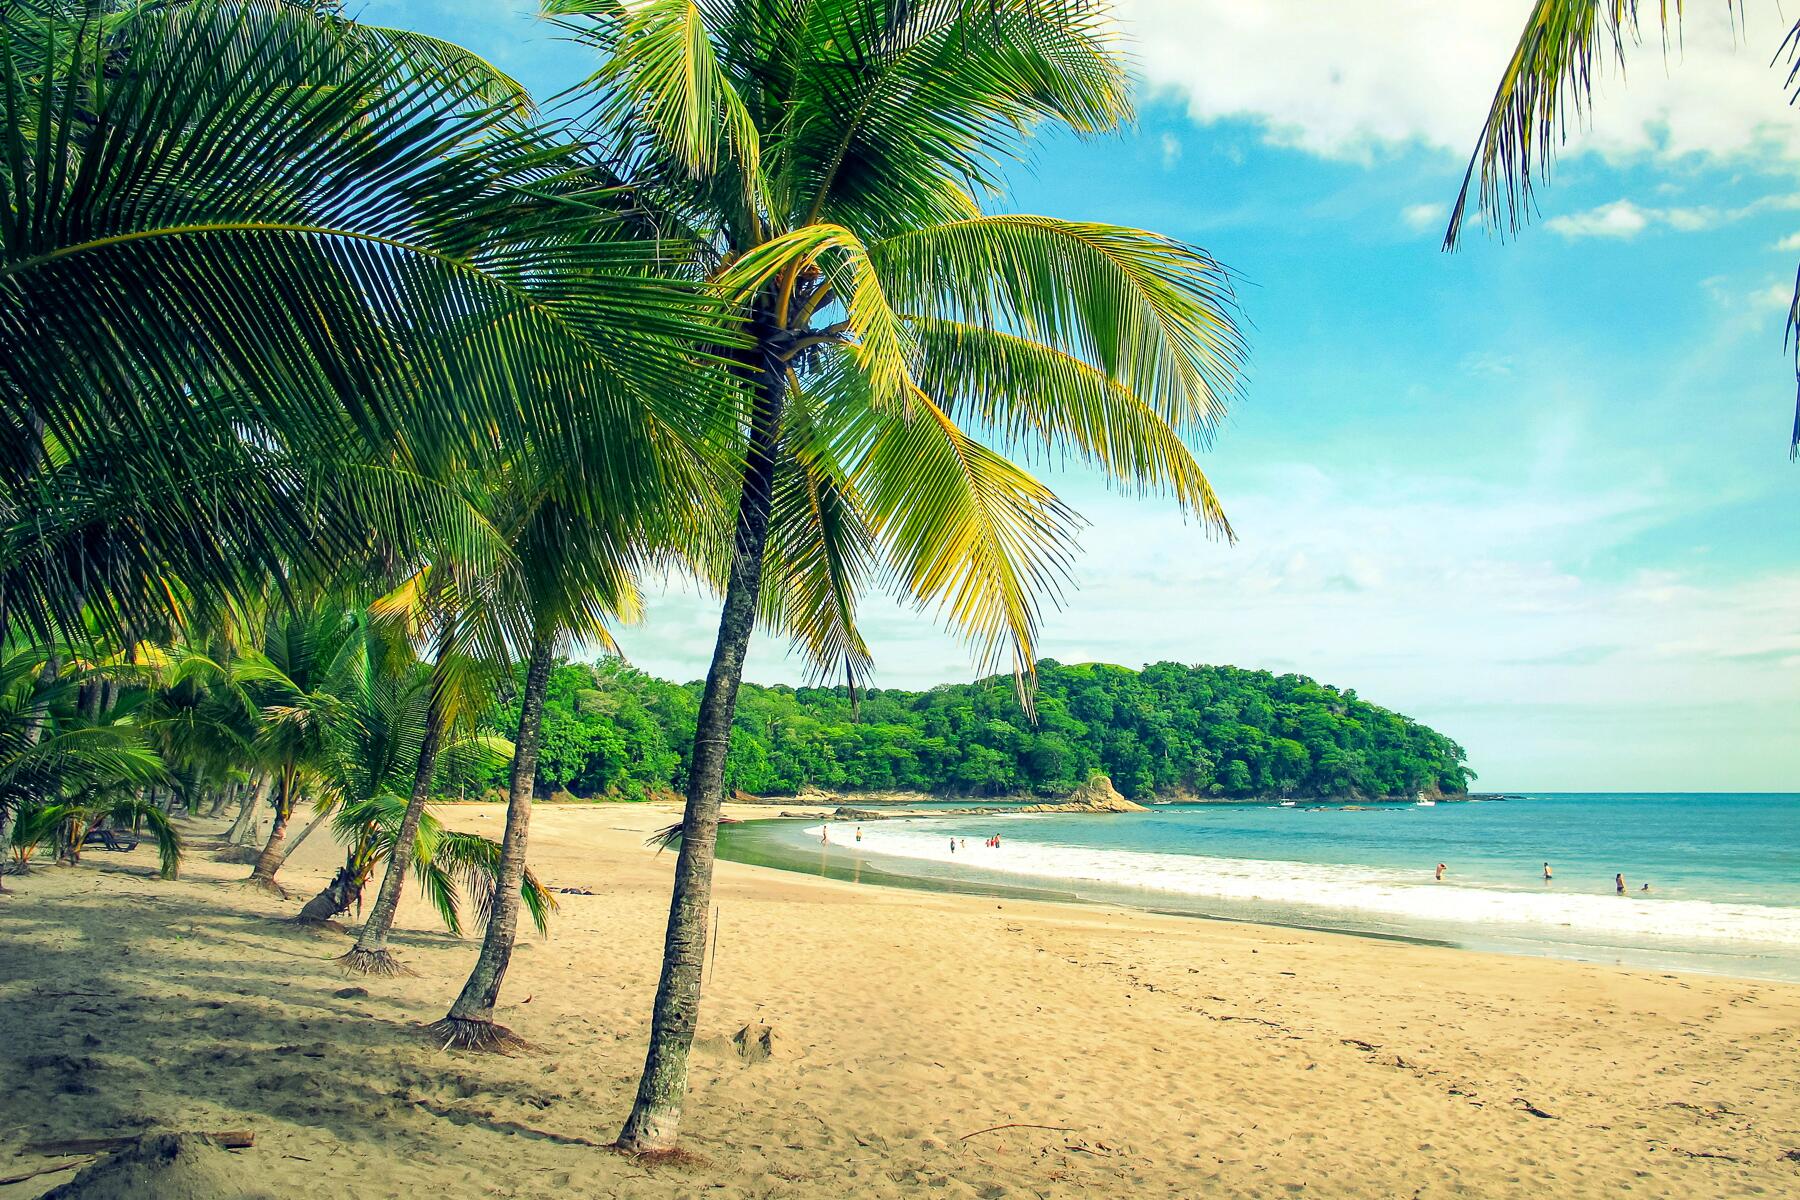 What You Need to Know Before You Go to Costa Rica